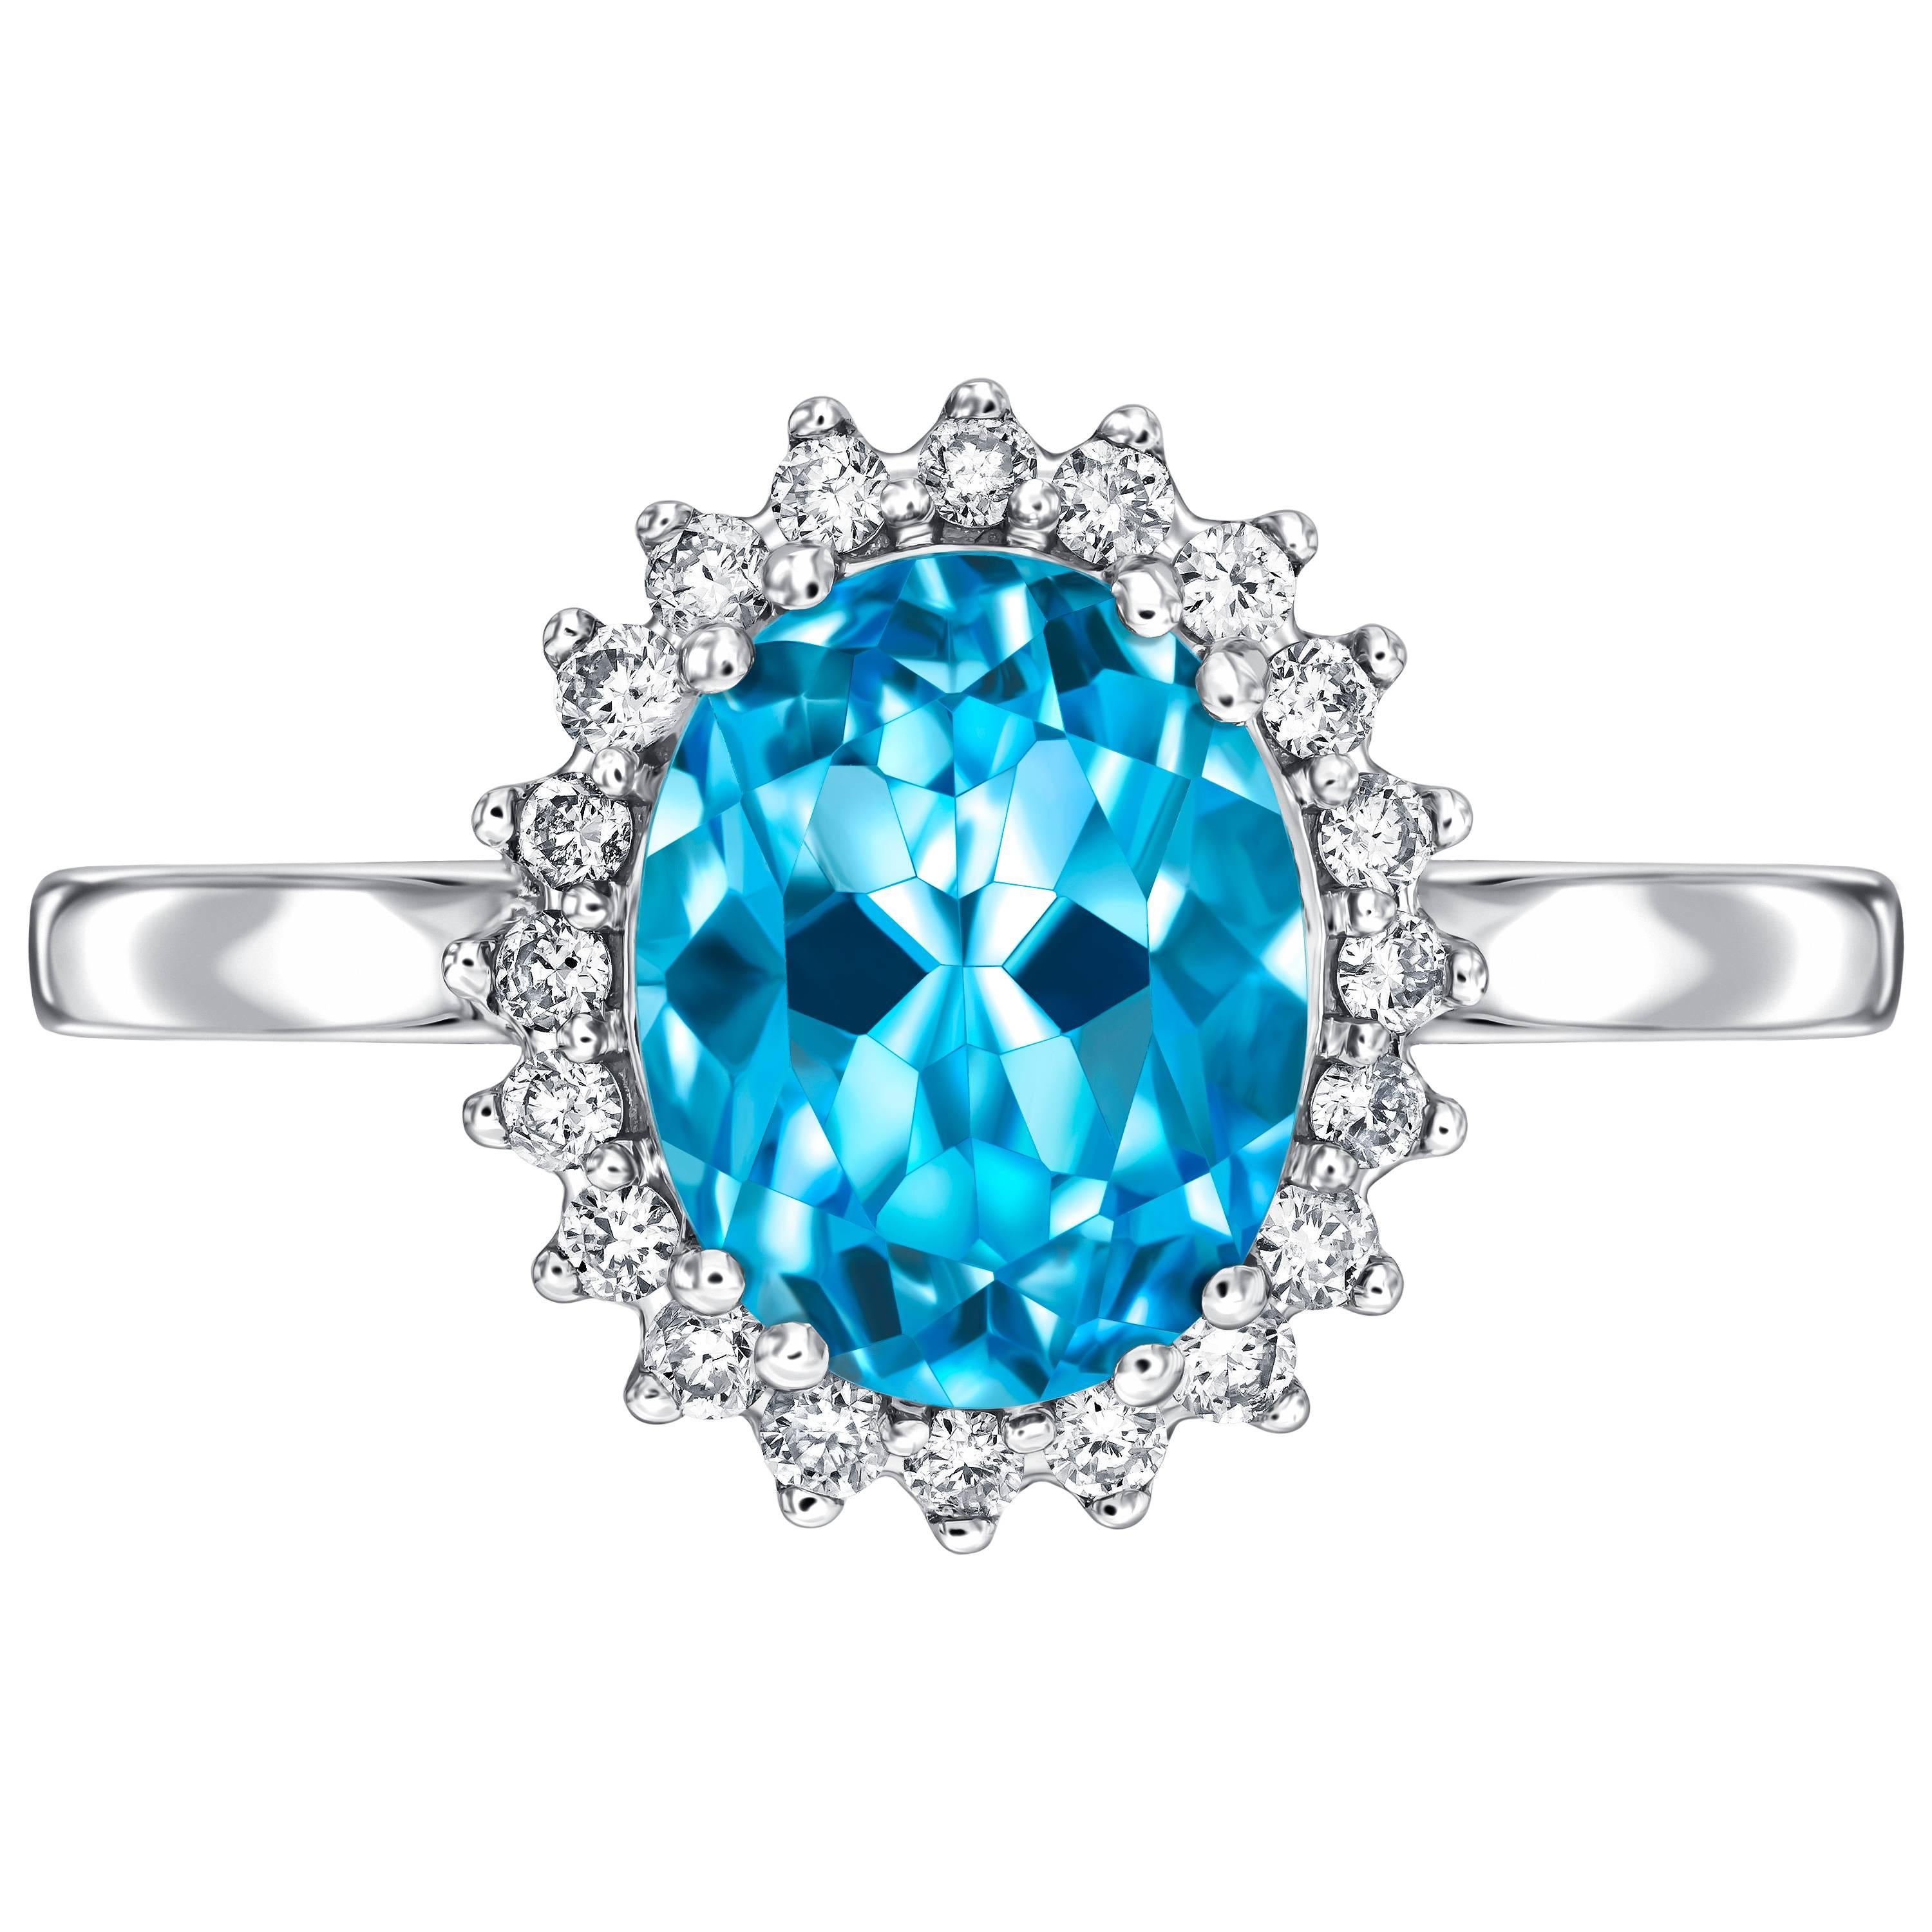 Vintage 18k white gold ring with 2.20ct blue topaz centerpiece and a cluster of 0.20ct H-SI diamonds. Each diamond from the halo is set with a triple claw for a spikey edged look reminiscent of a more floral style. This ring has a total weight of